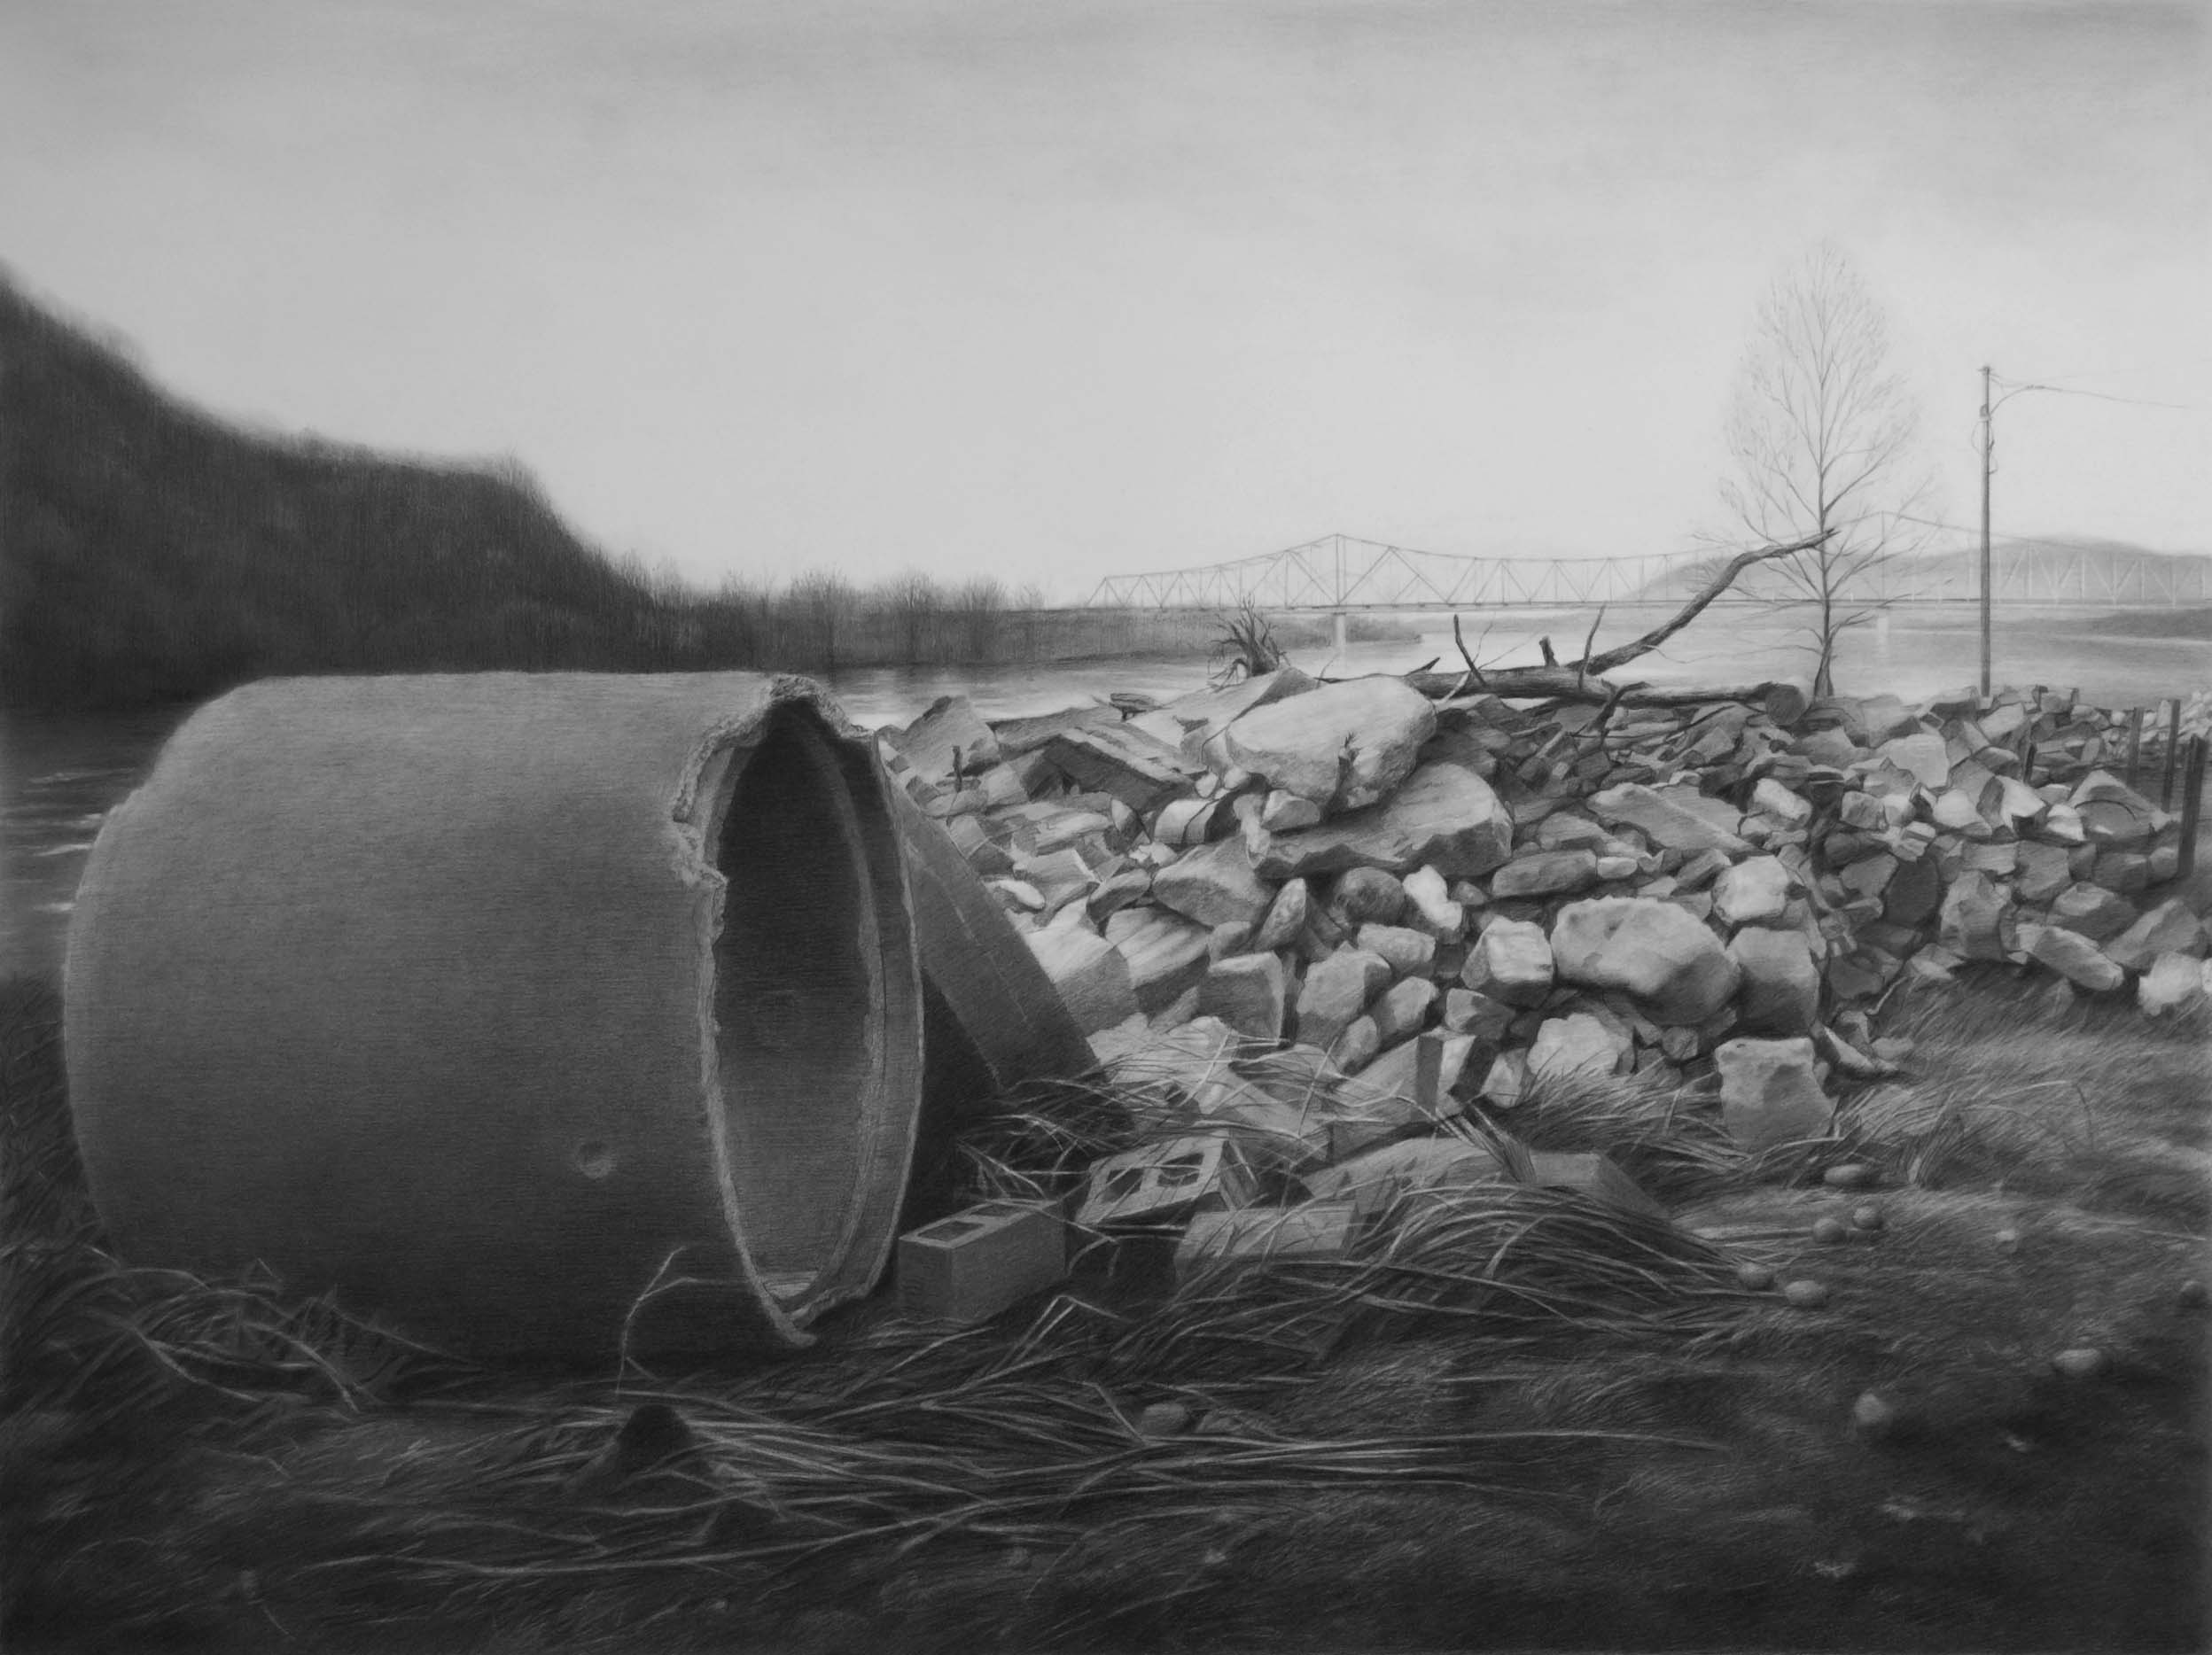   Beyond the Floodwall,     Portsmouth, OH   2015  Graphite on paper  27 x 36 inches    